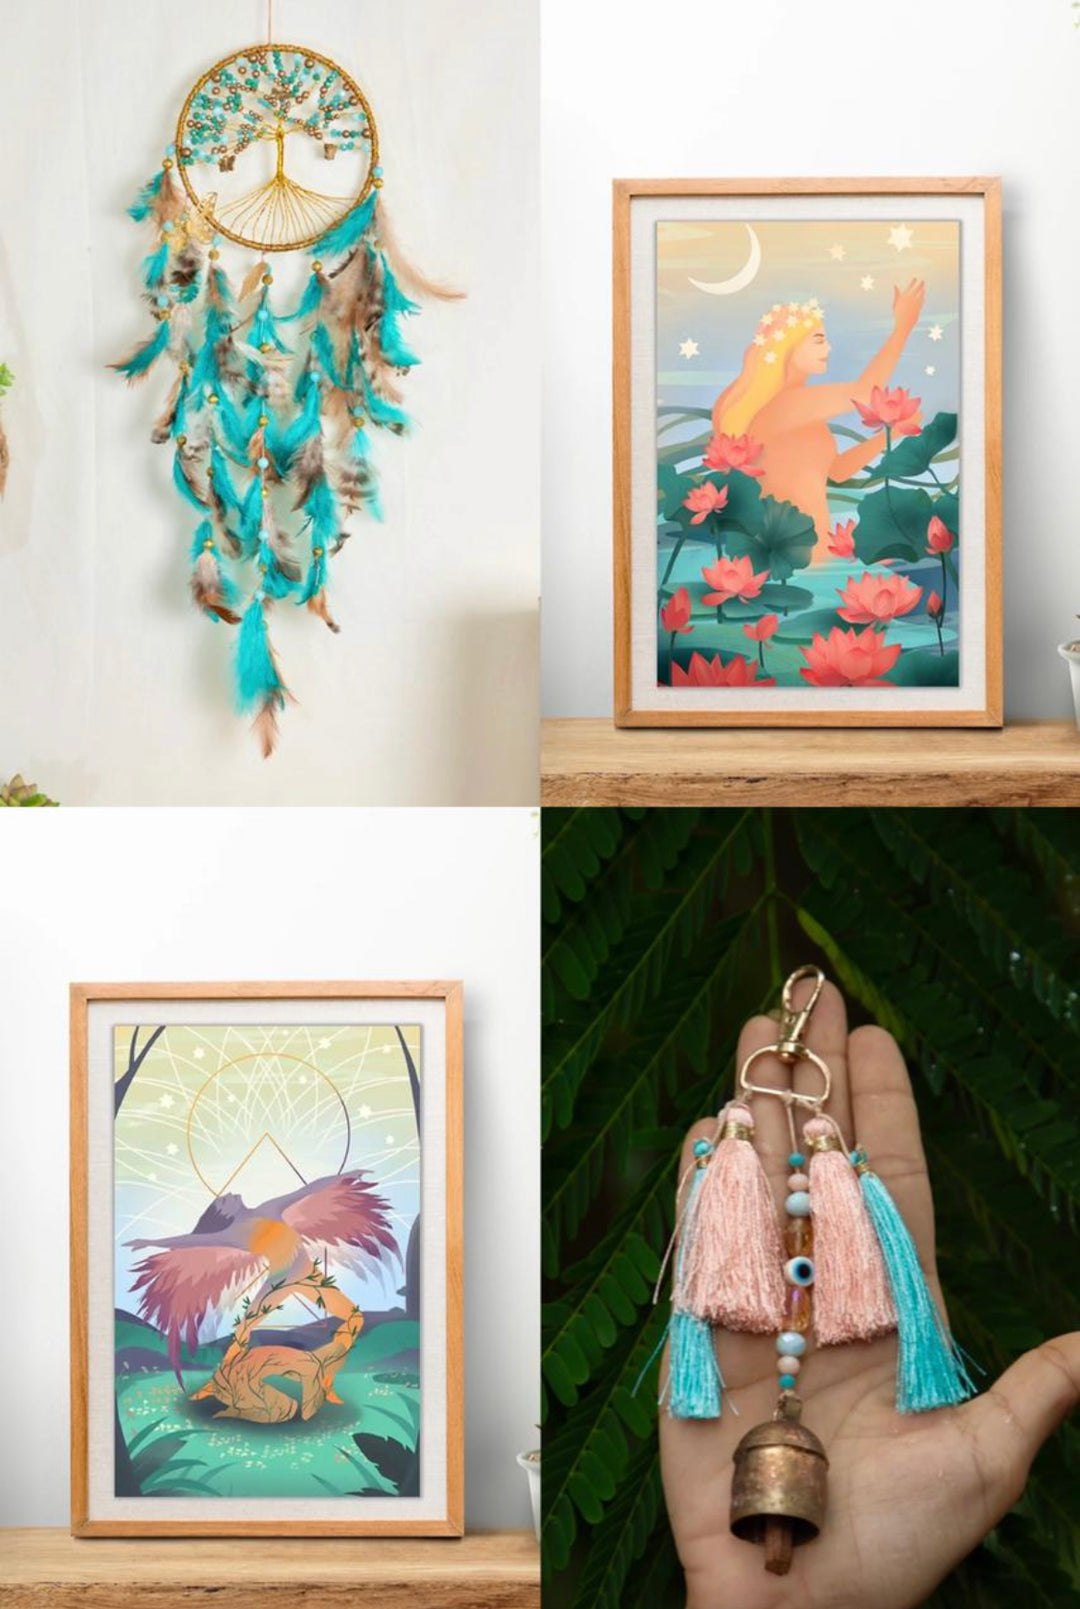 Gentle windchime keychain + Turquoise tree of life + New vision art print for charity + Creativity art print for charity - Combo (4)